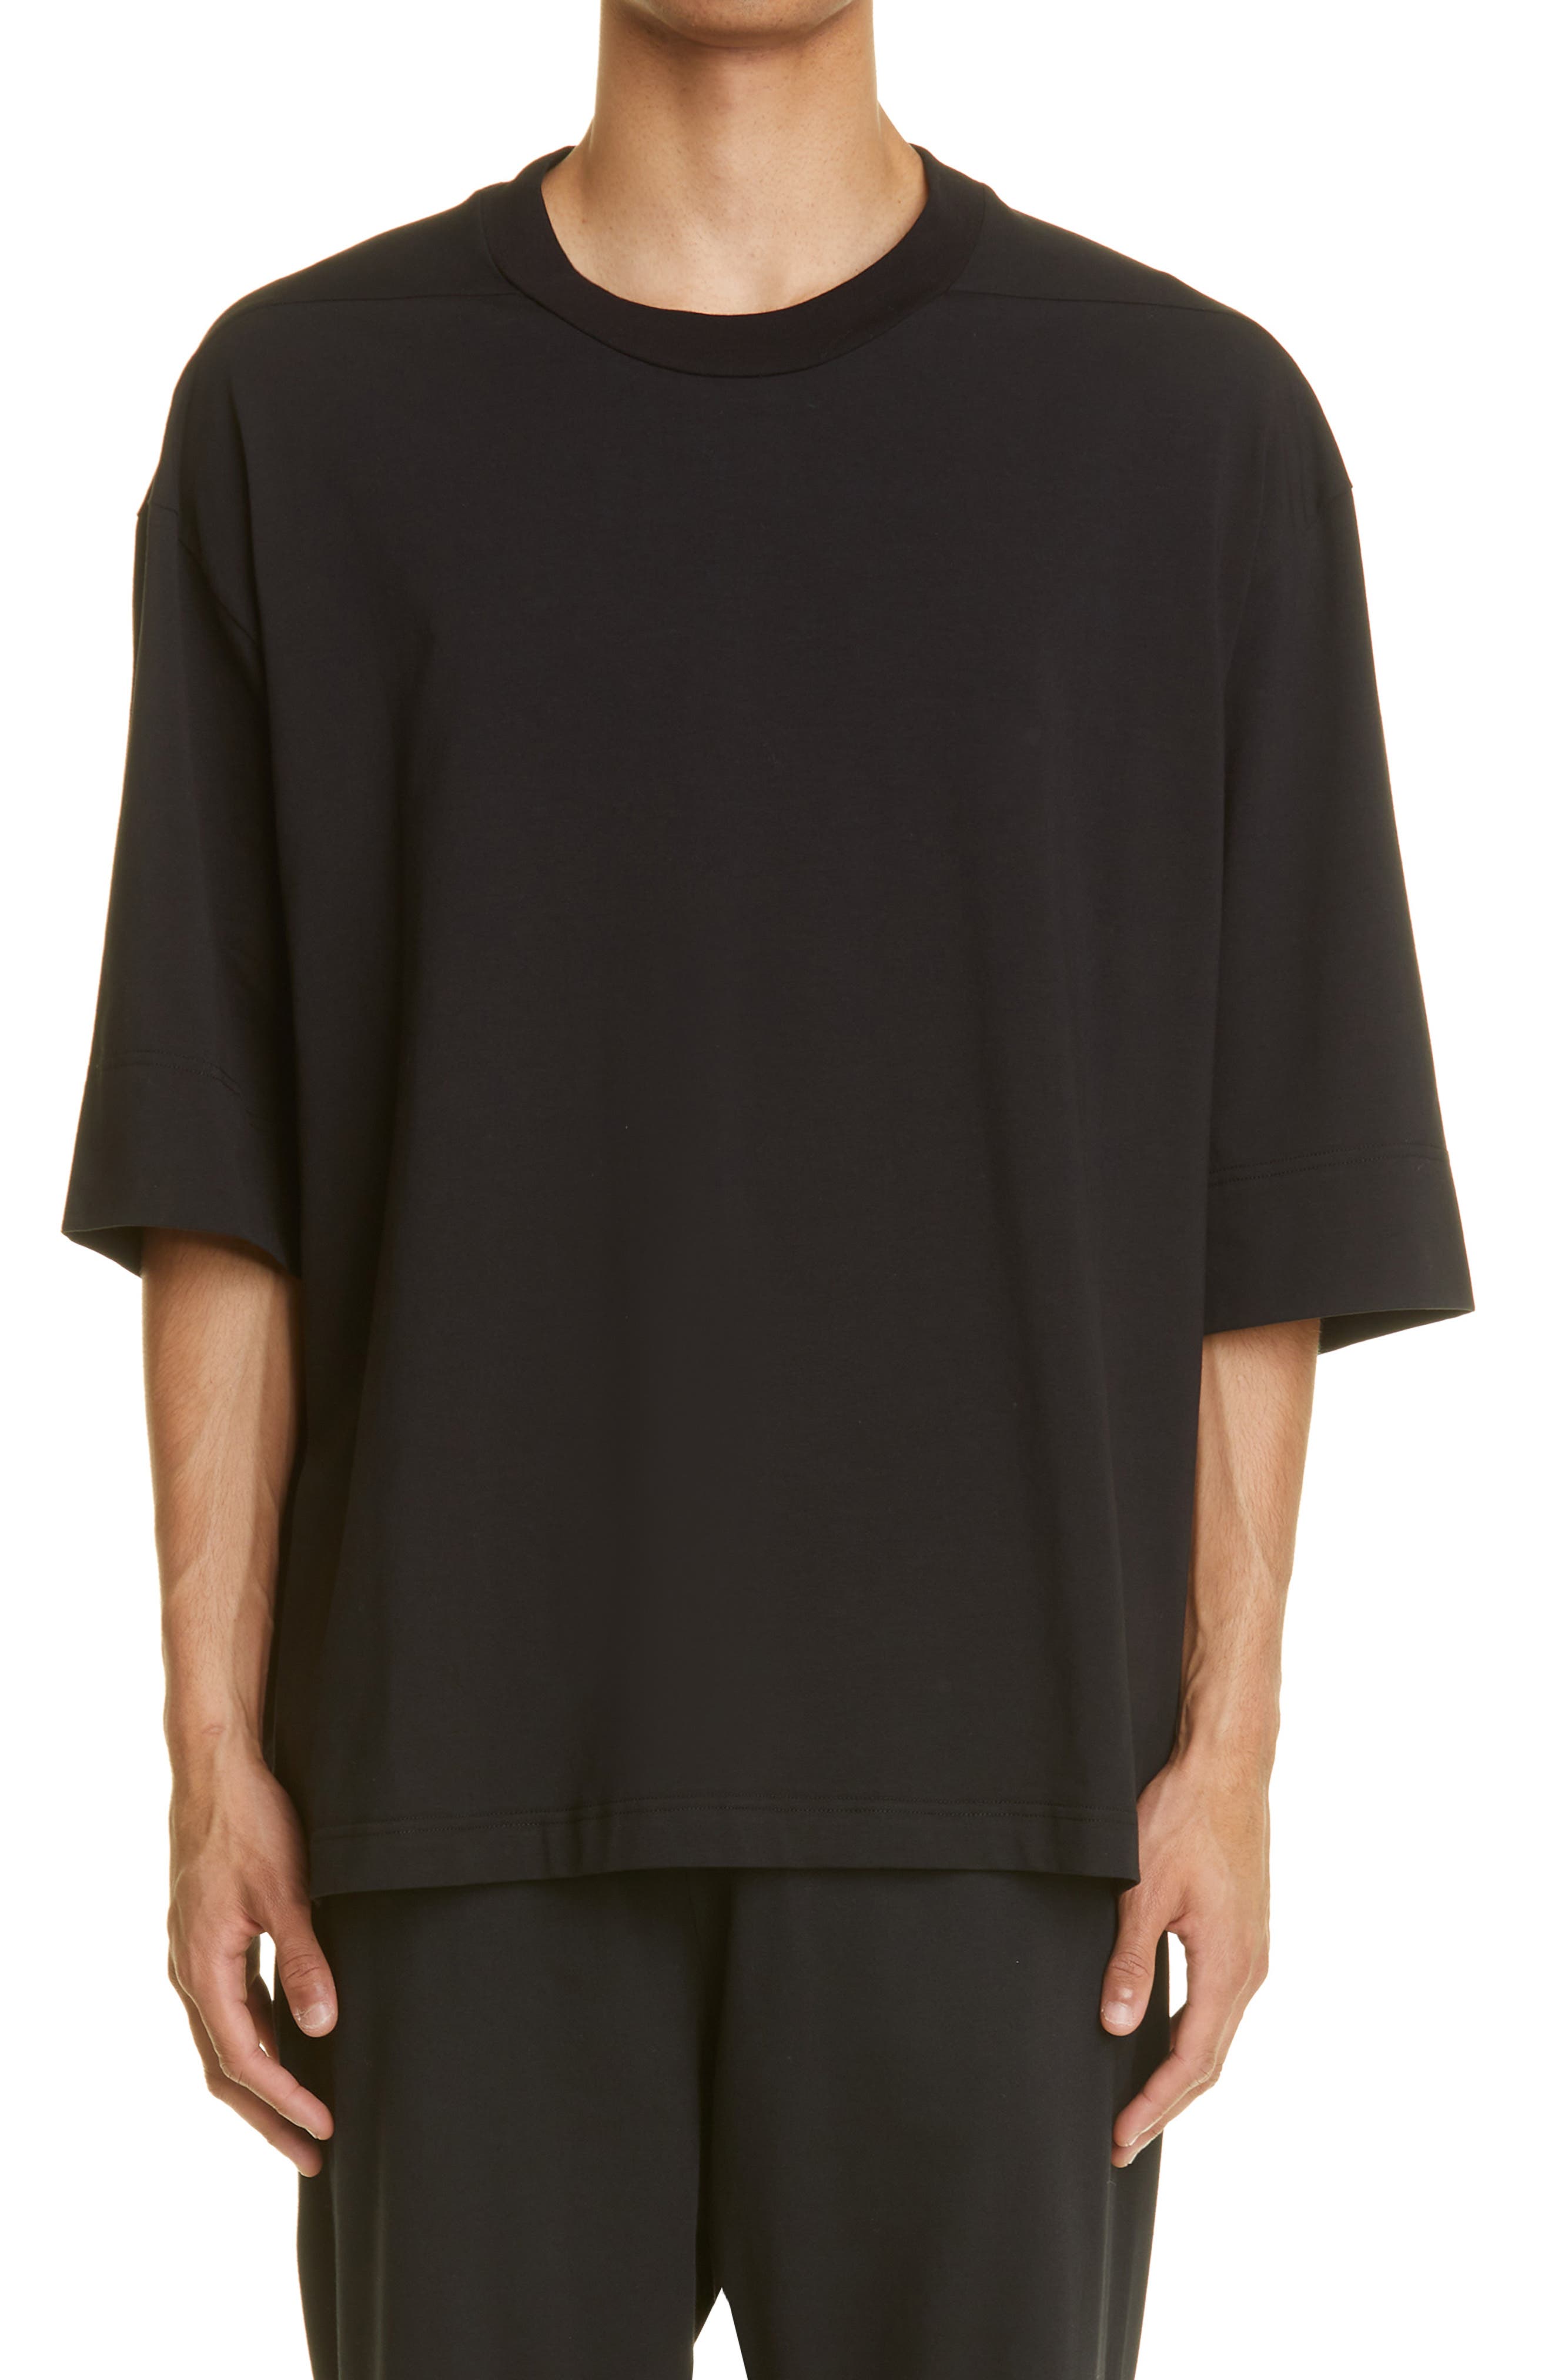 Fear of God Stretch Cotton T-Shirt in Black at Nordstrom, Size X-Small